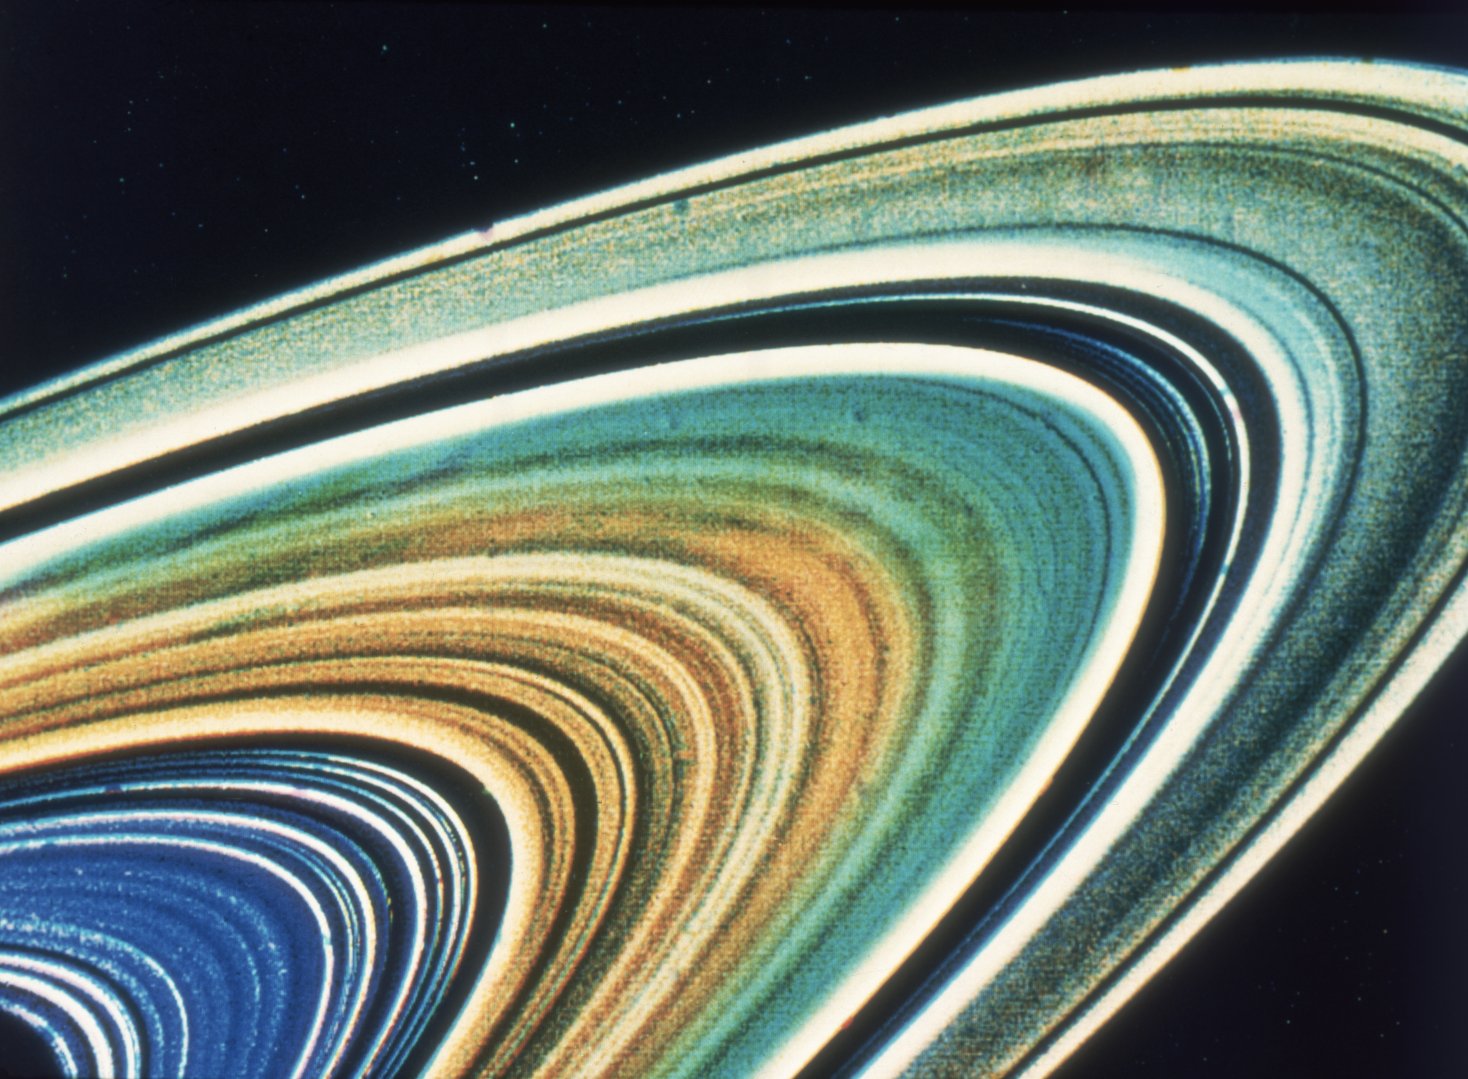 voyager 2 images of saturn